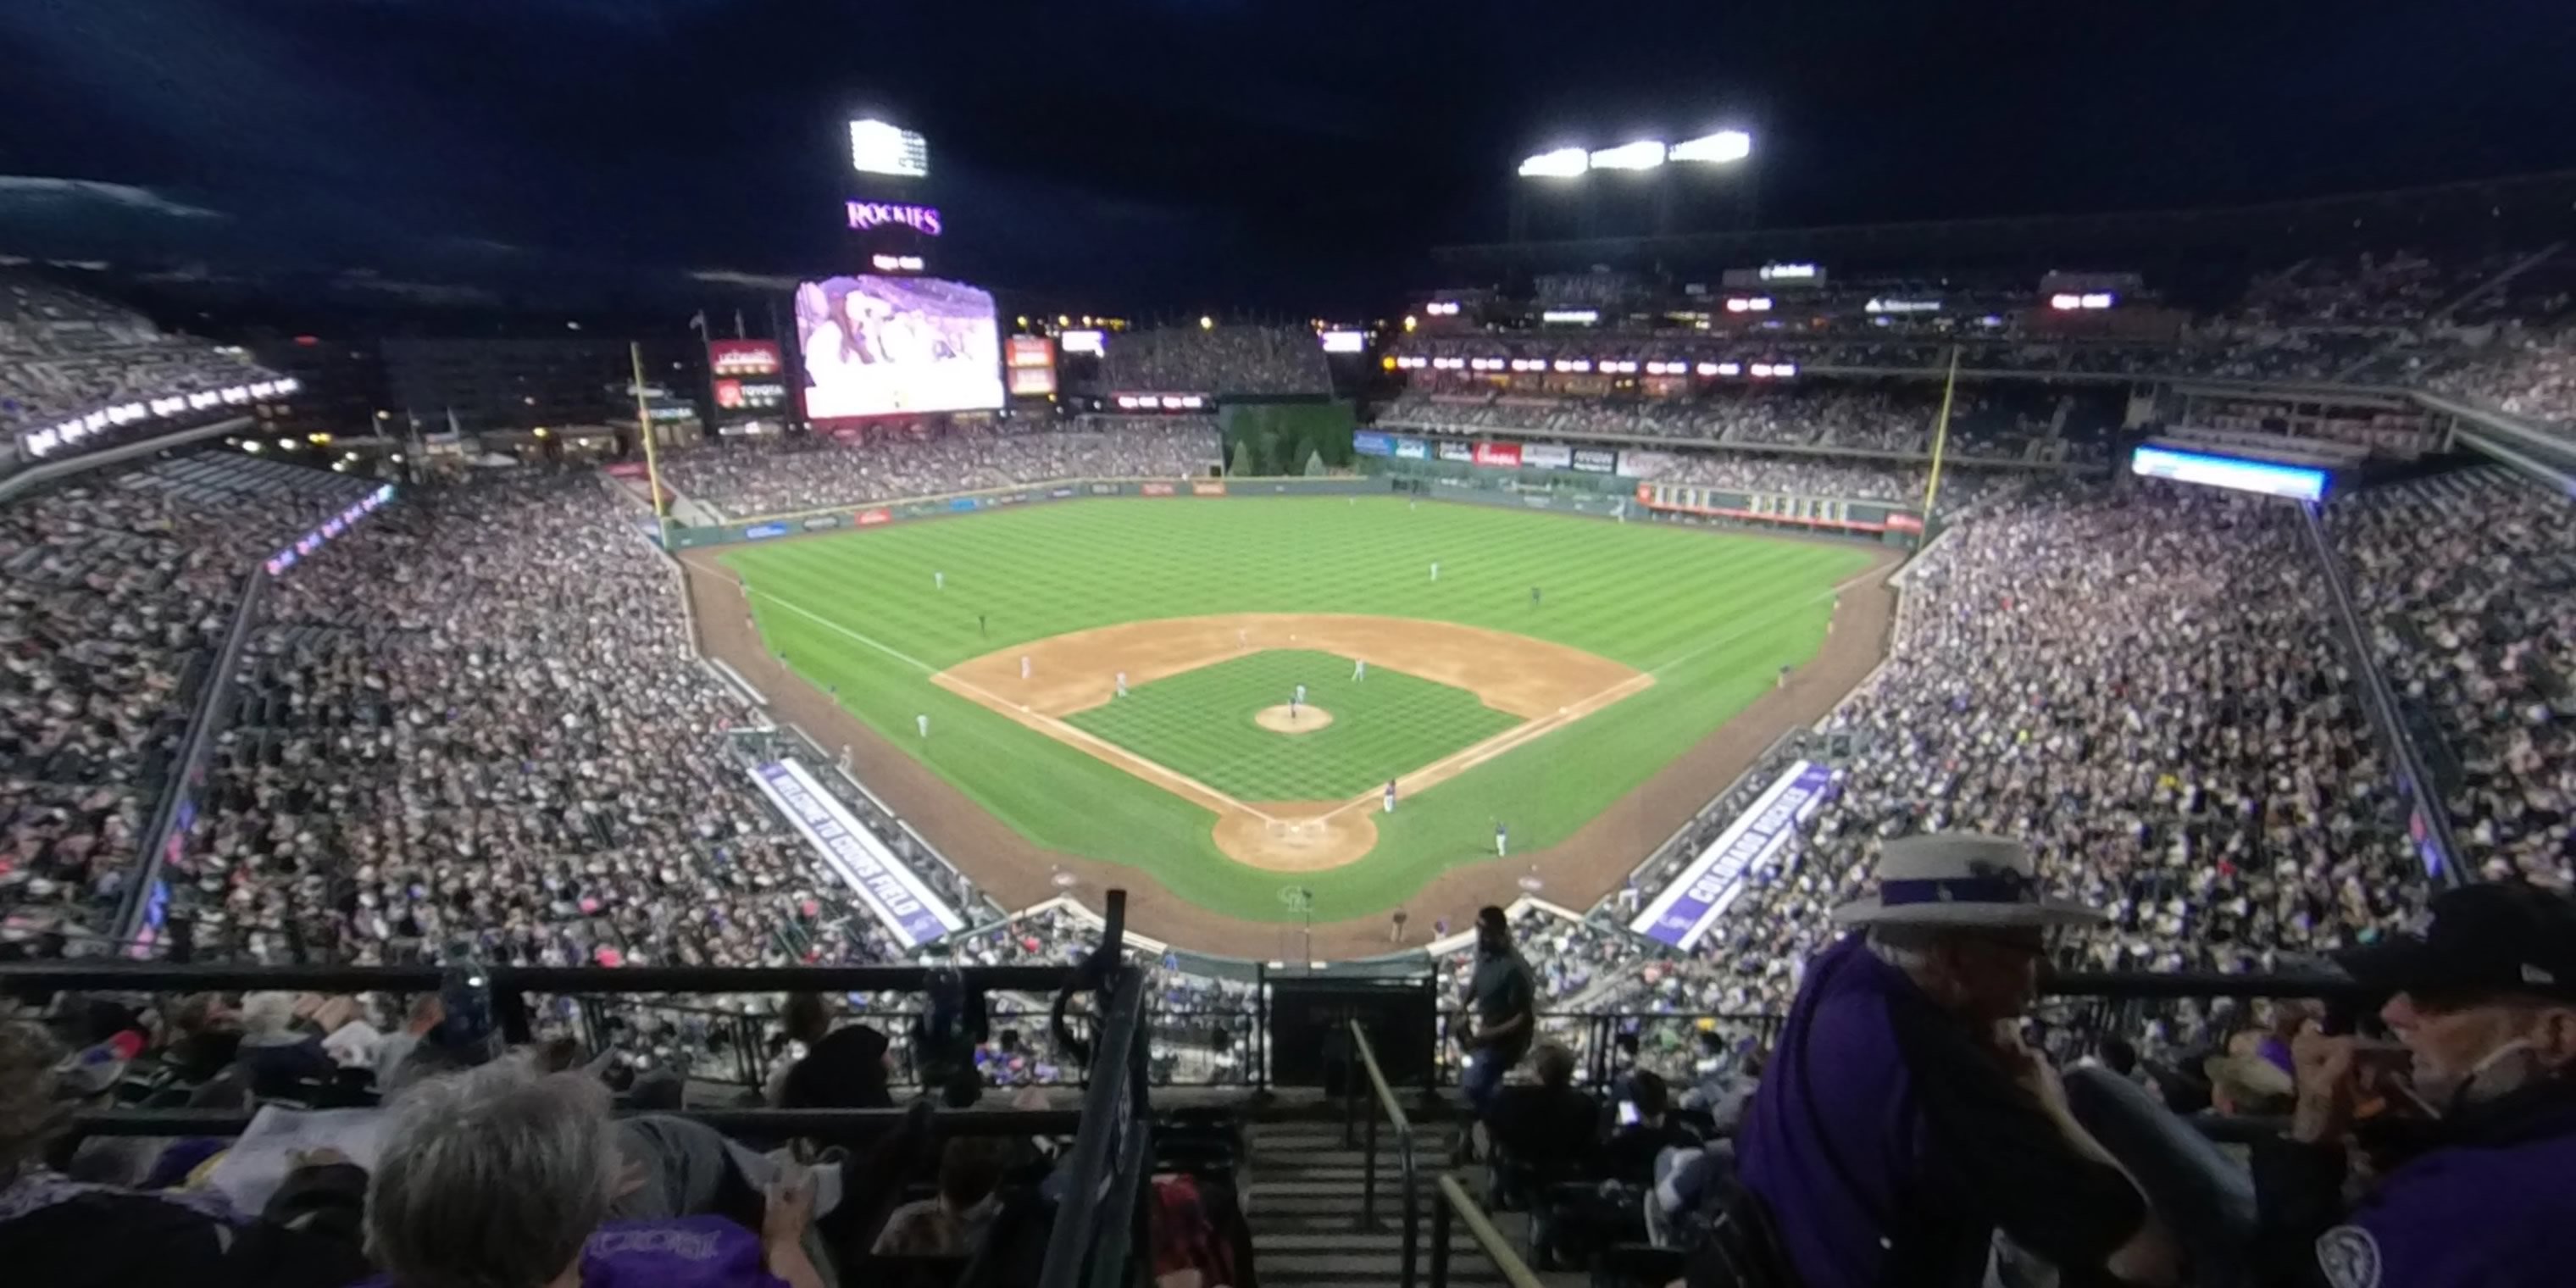 section 329 panoramic seat view  - coors field